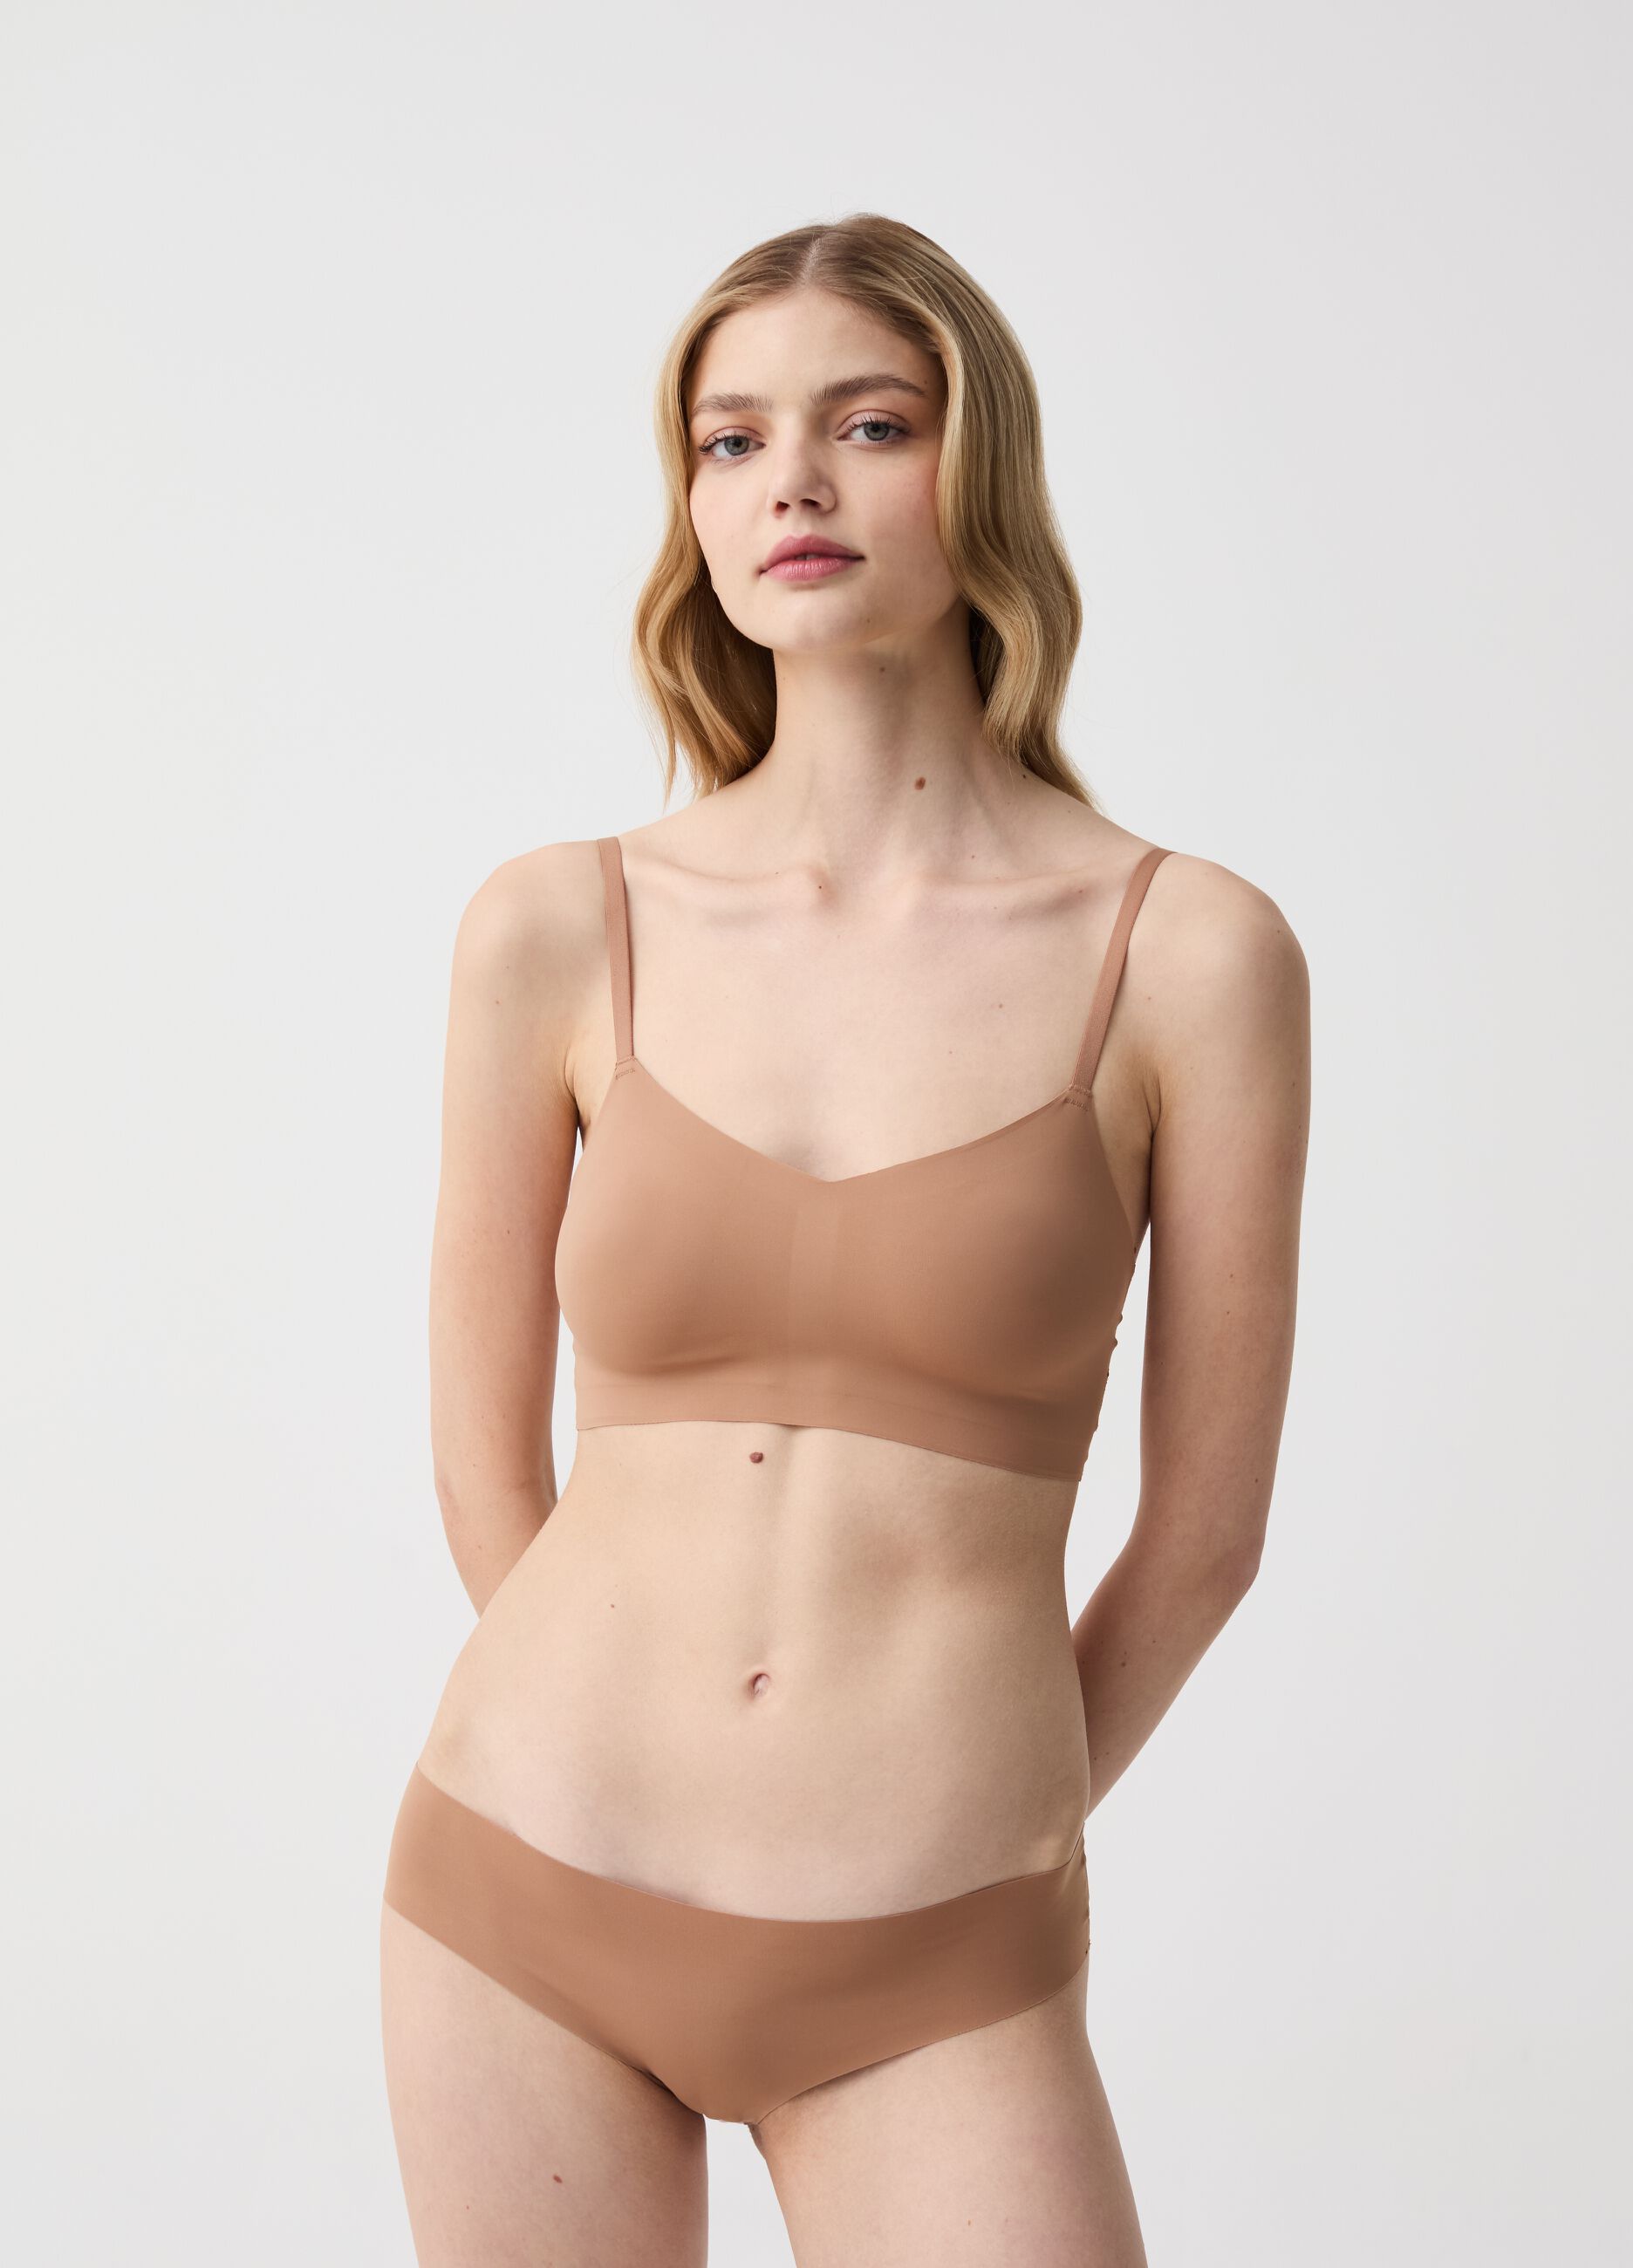 The Nude high-rise briefs